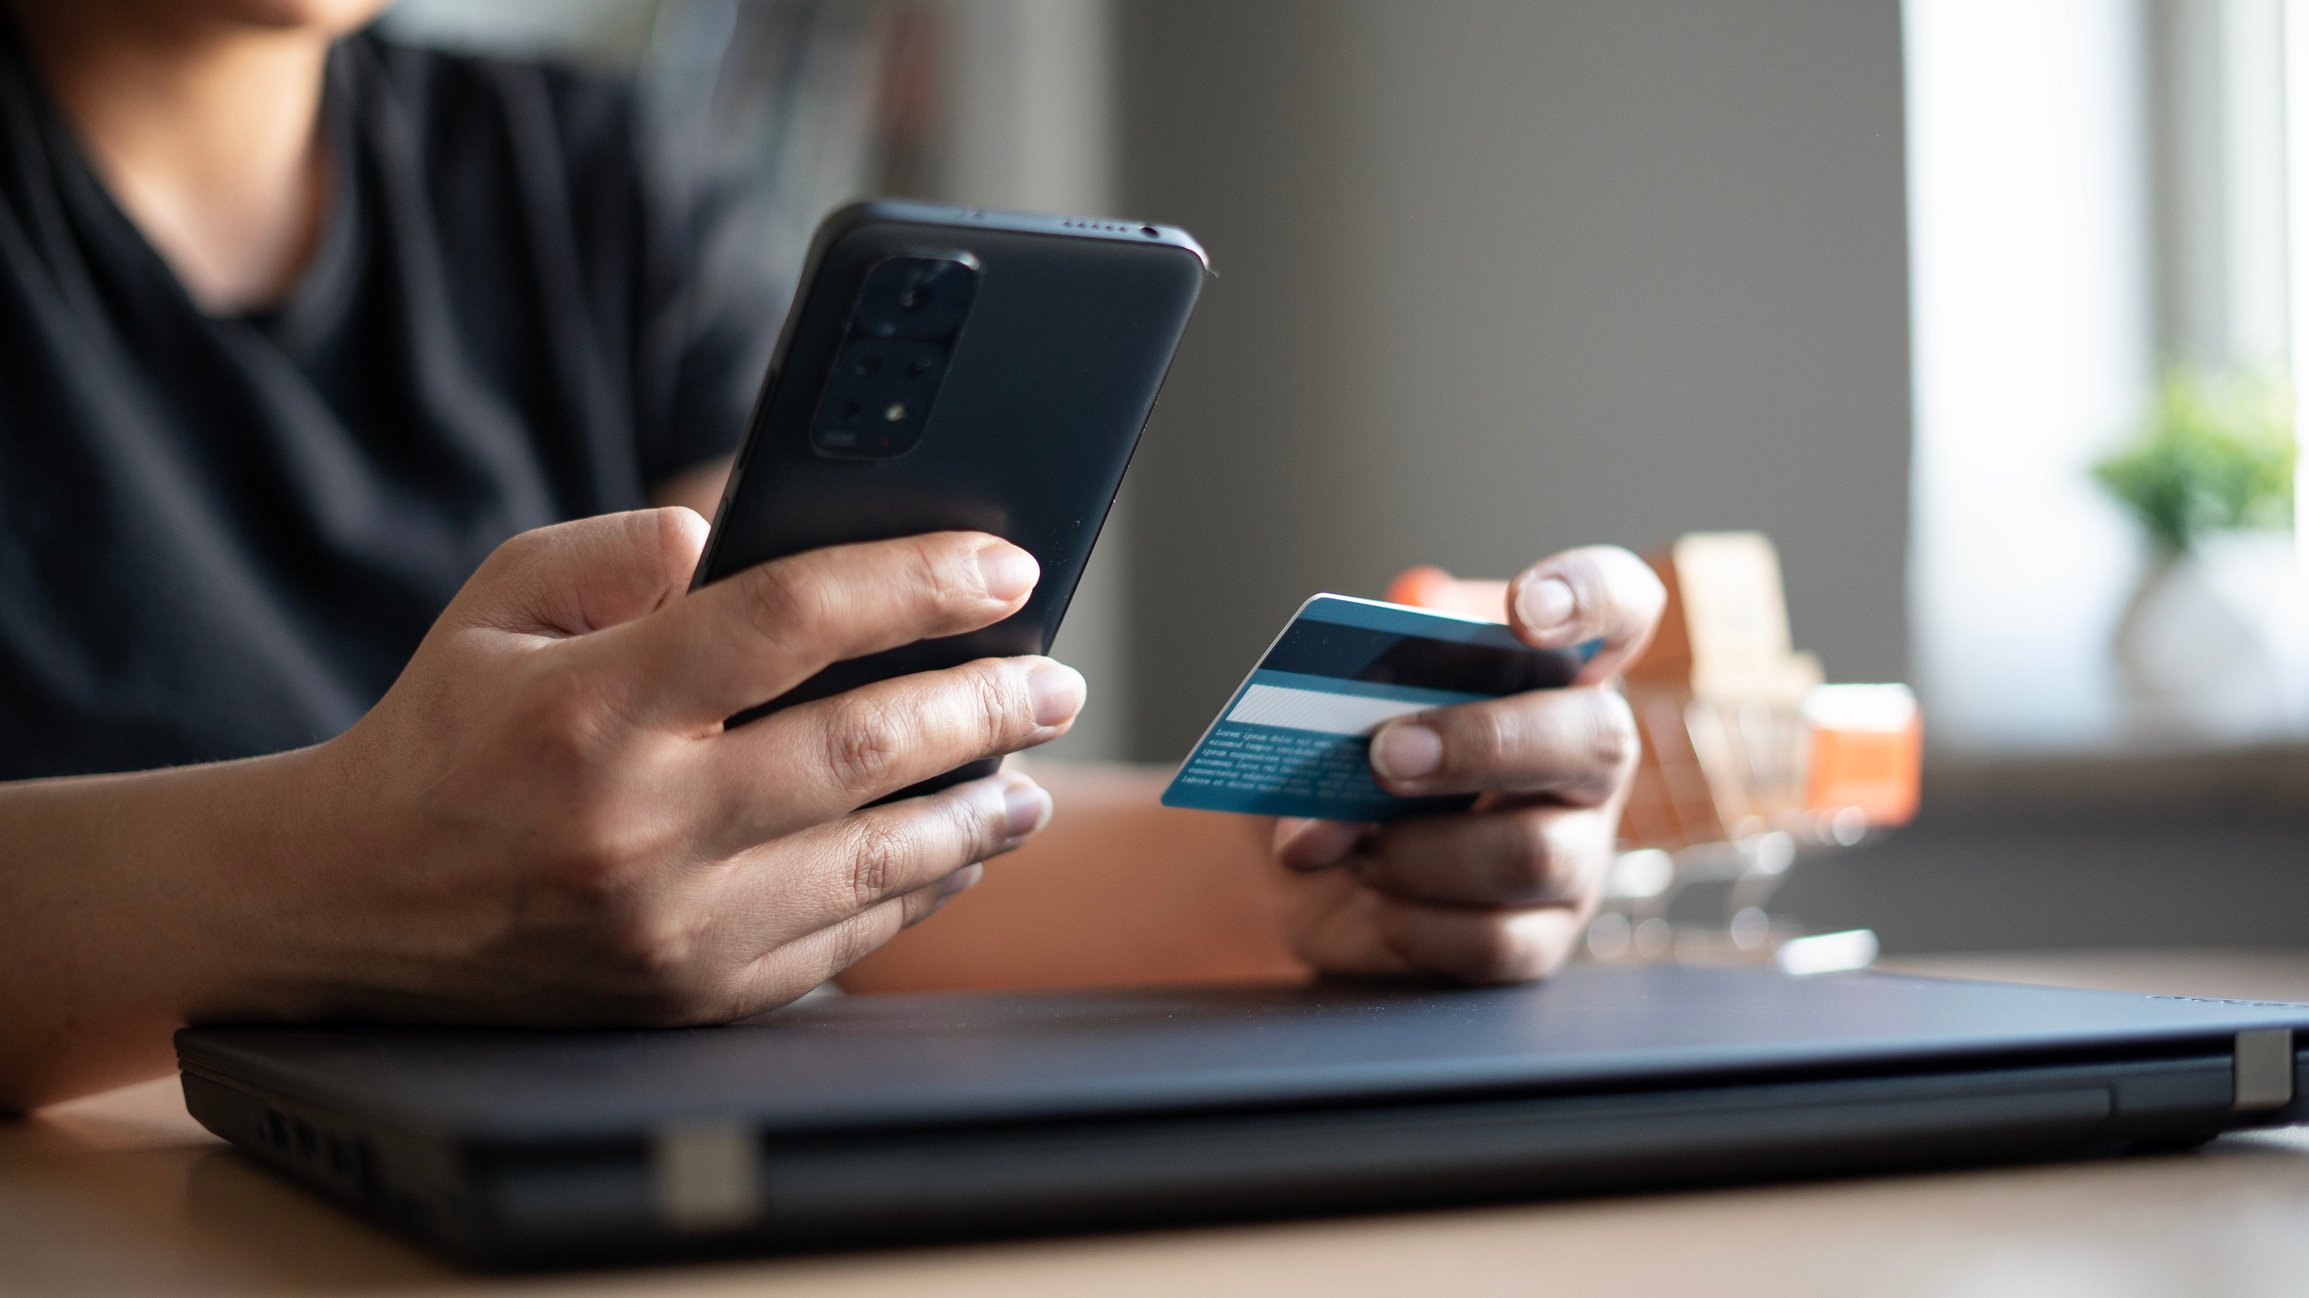 person making purchase on phone using credit card